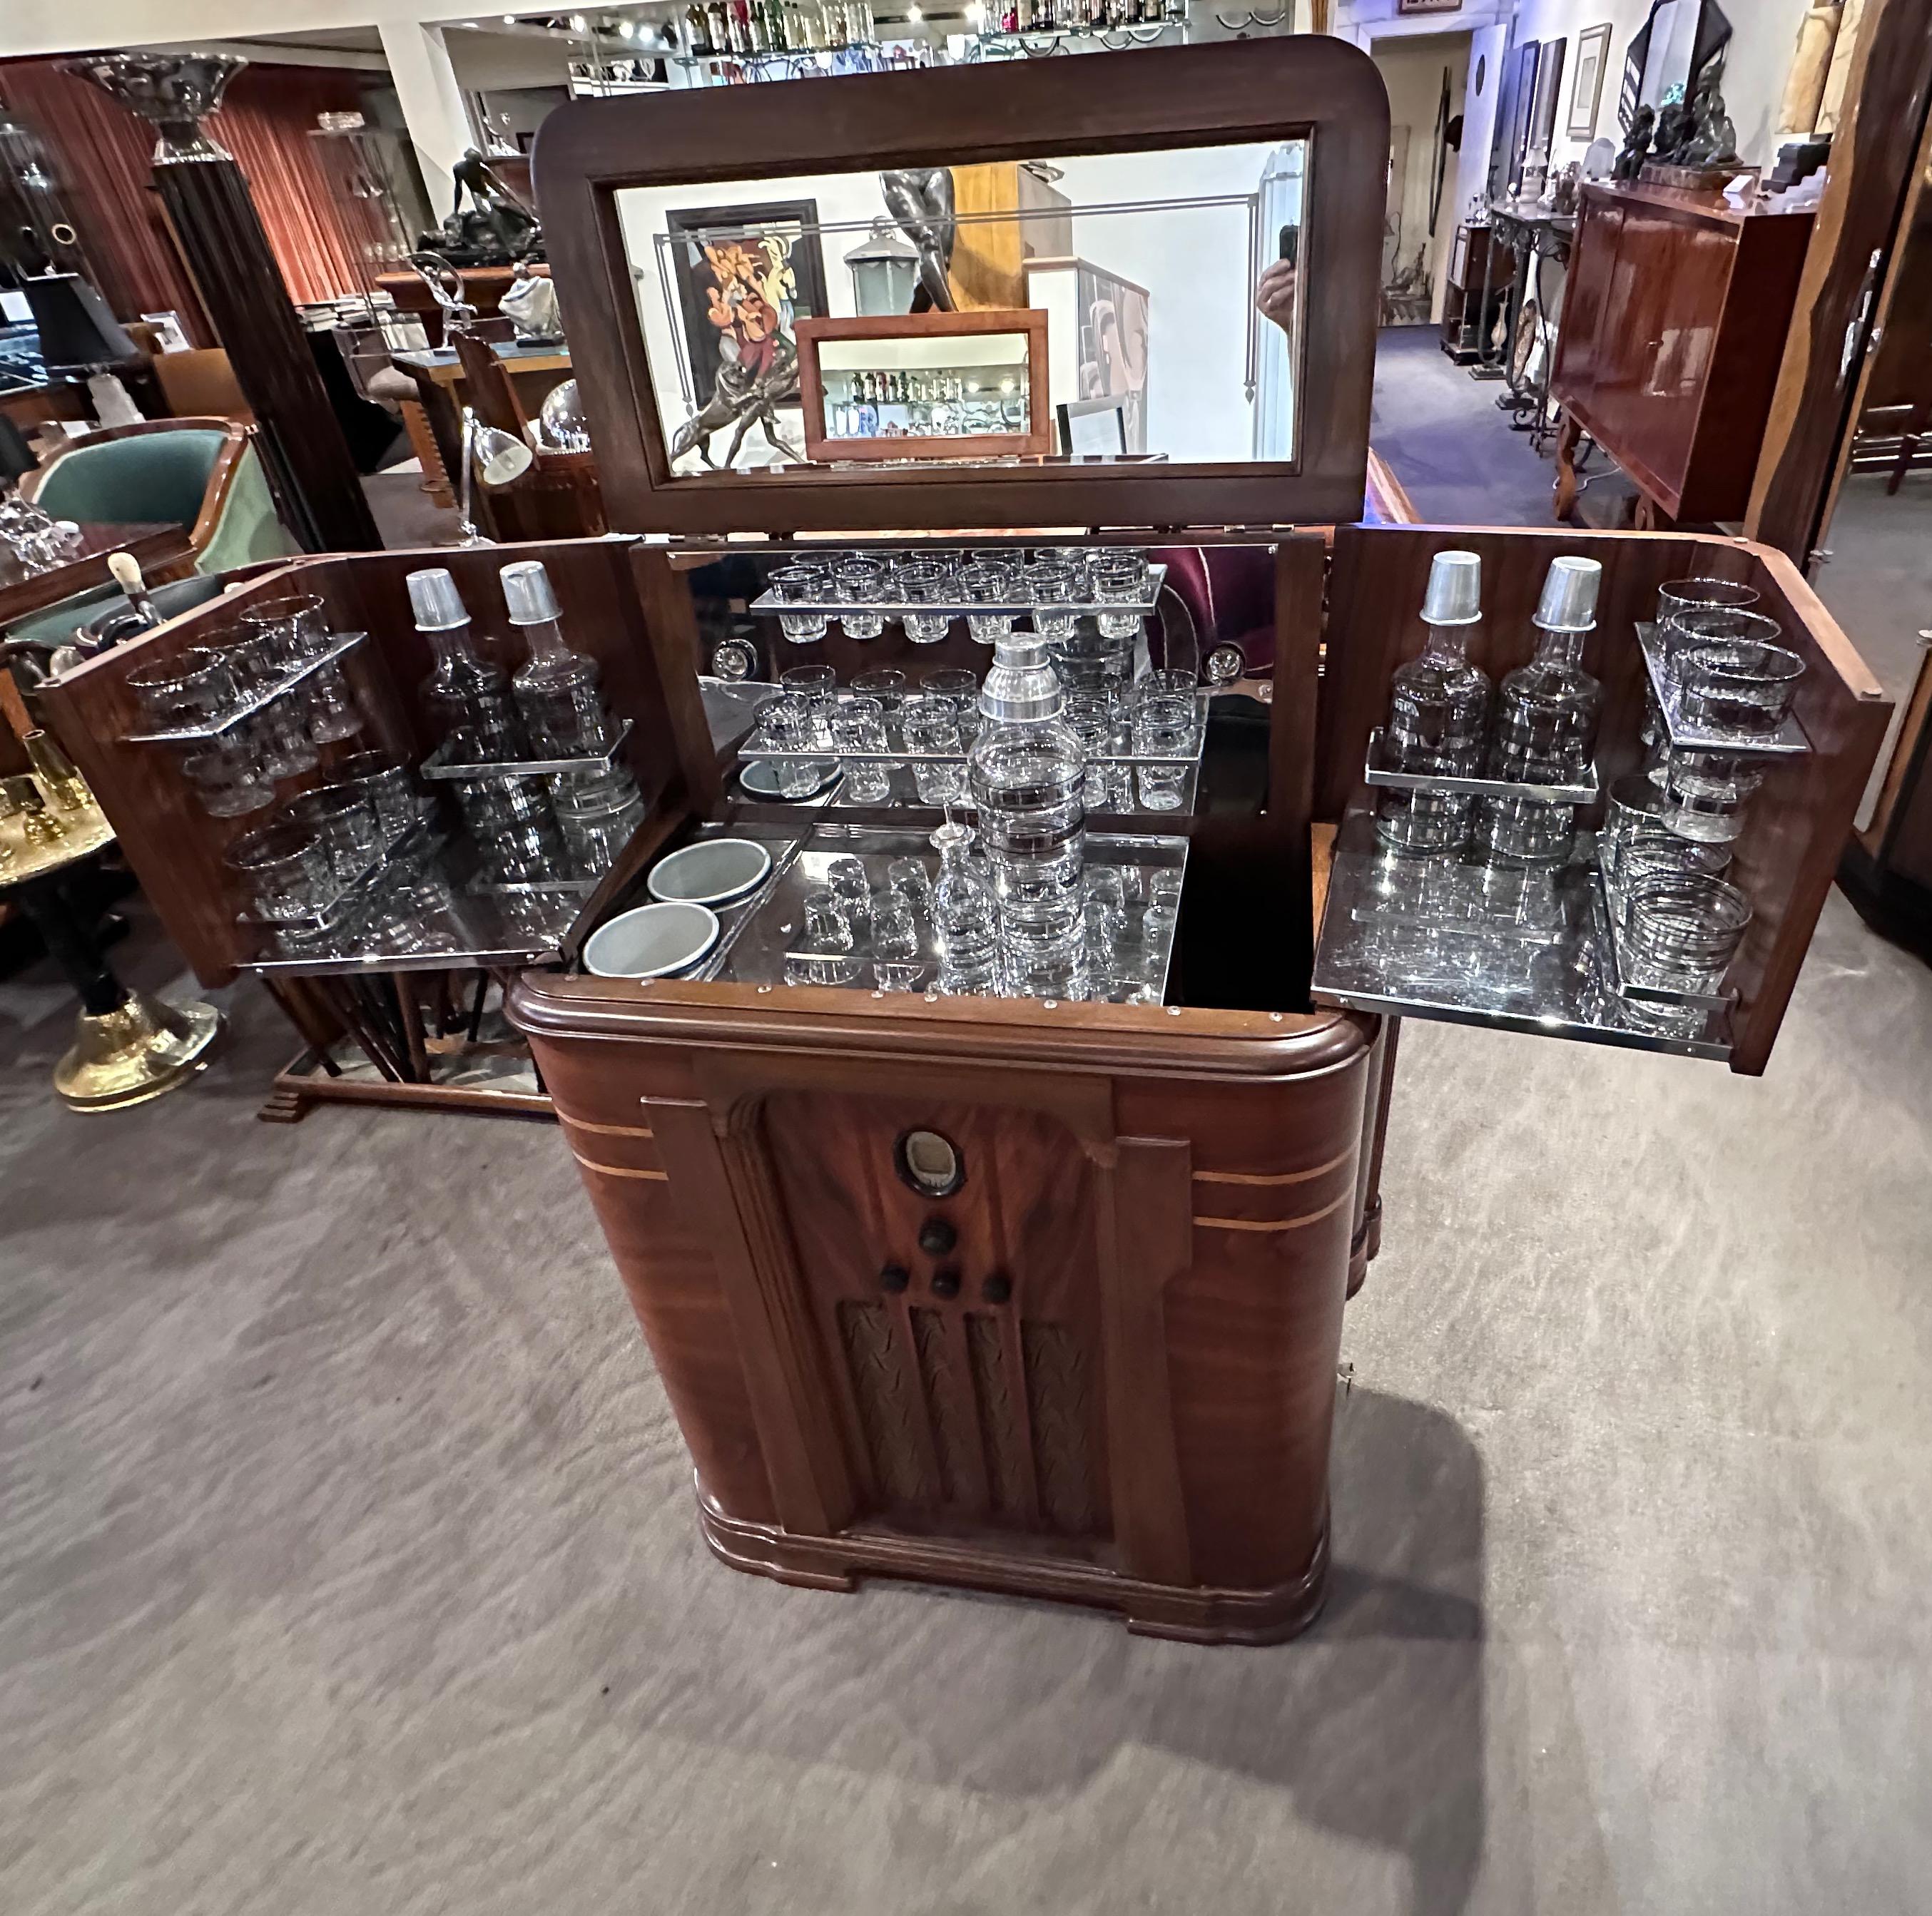 his spectacular Art Deco Philco Radio Bar is one of the most highly sought-after pieces by radio and bar enthusiasts alike. Created originally during the Prohibition Era – a time of fascination with hidden and secret liquor bars, it reached a high